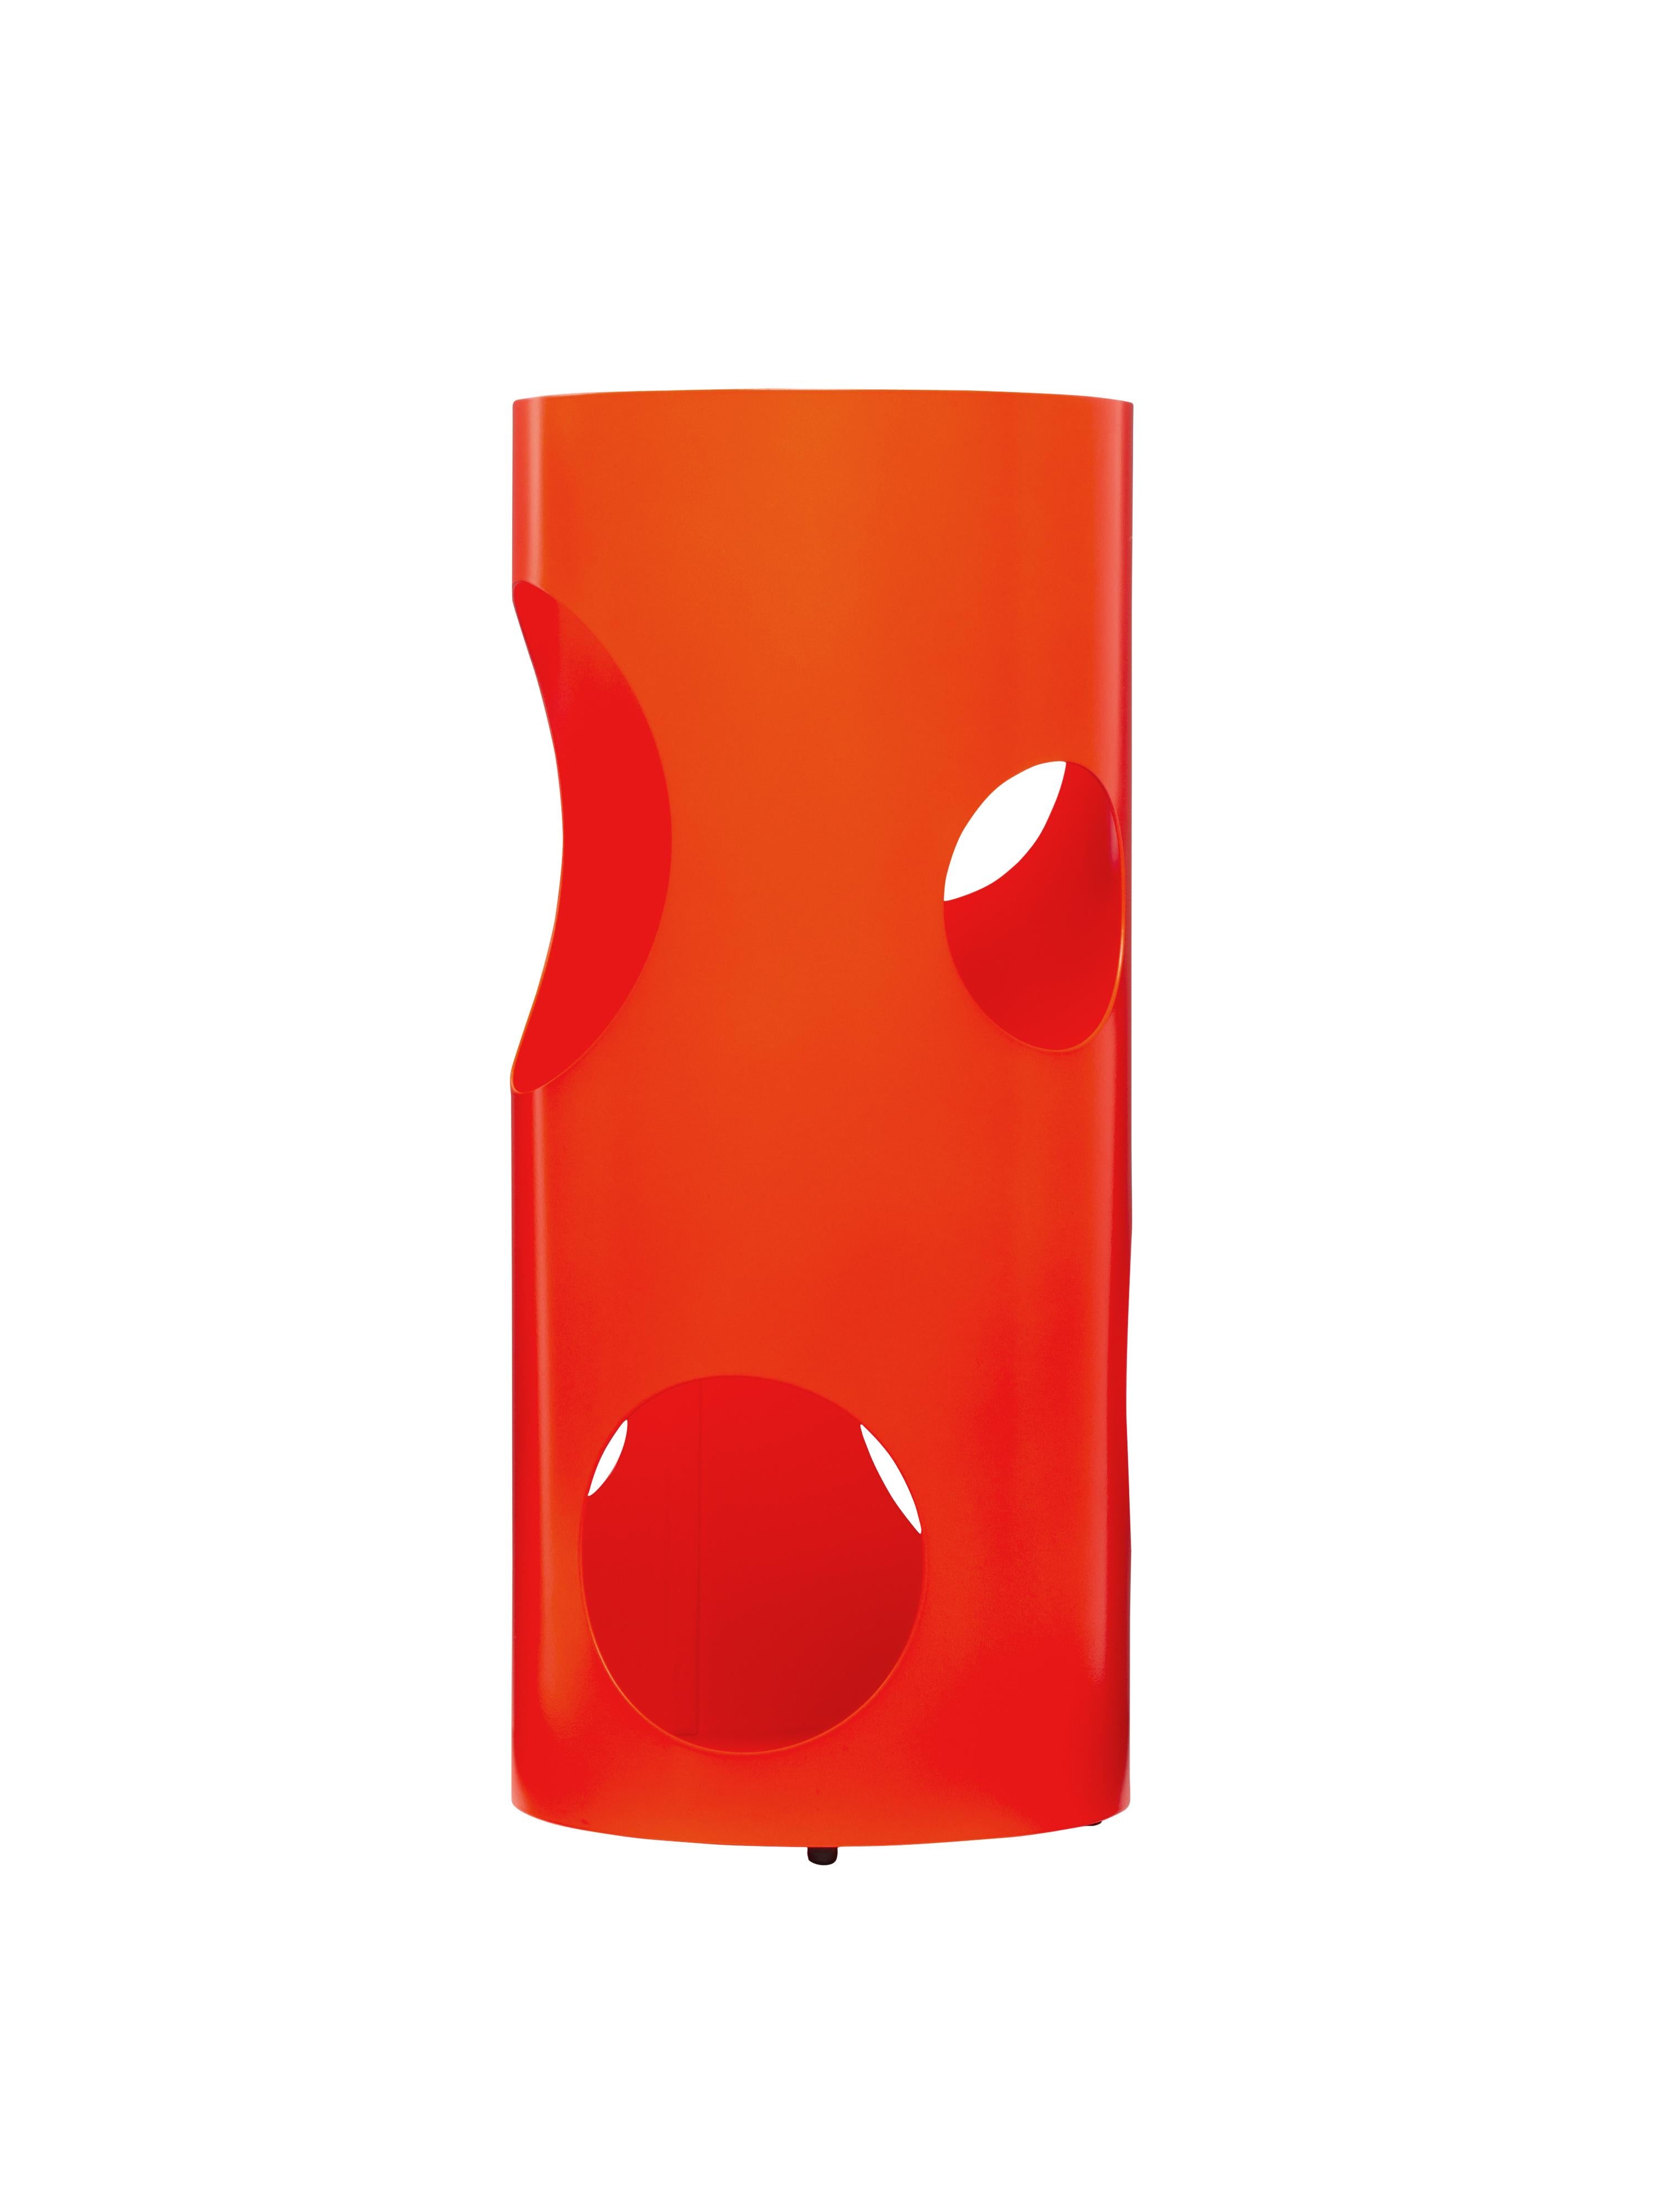 Holed metal cylinder, powder coated in Fluo orange with orange HOME magnet inside
By Virgil Abloh
Dimensions: 22 W x 50 H
This item is only available to be purchased and shipped to the United States.